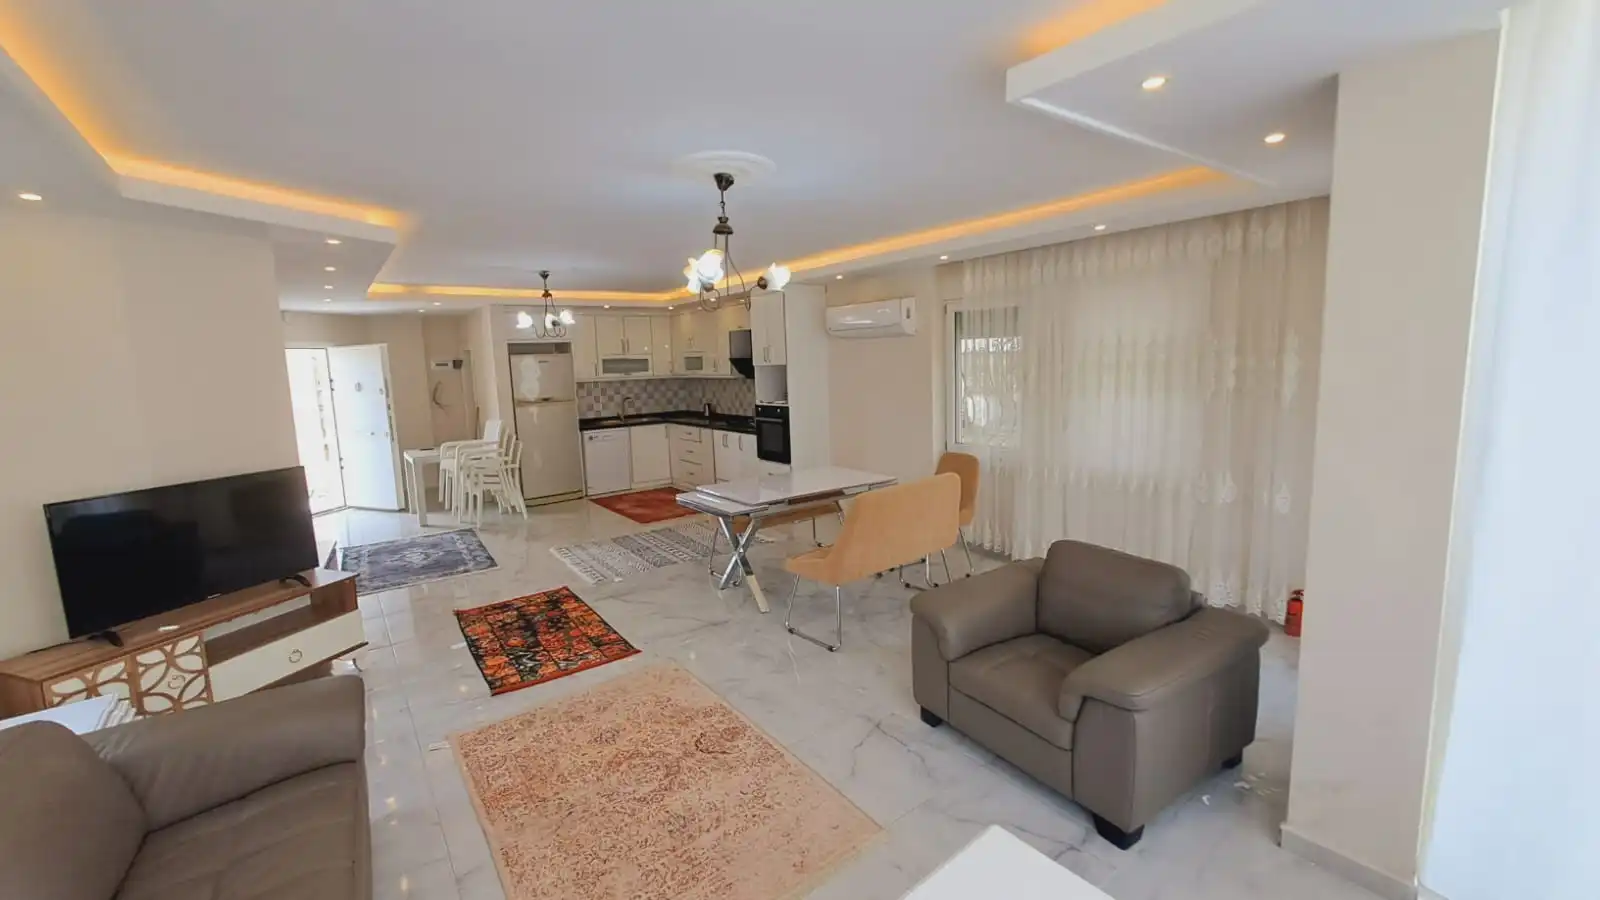 3+1 VİLLA FOR SALE WİTH NATURE VİEW İN AVSALLAR-ALANYA